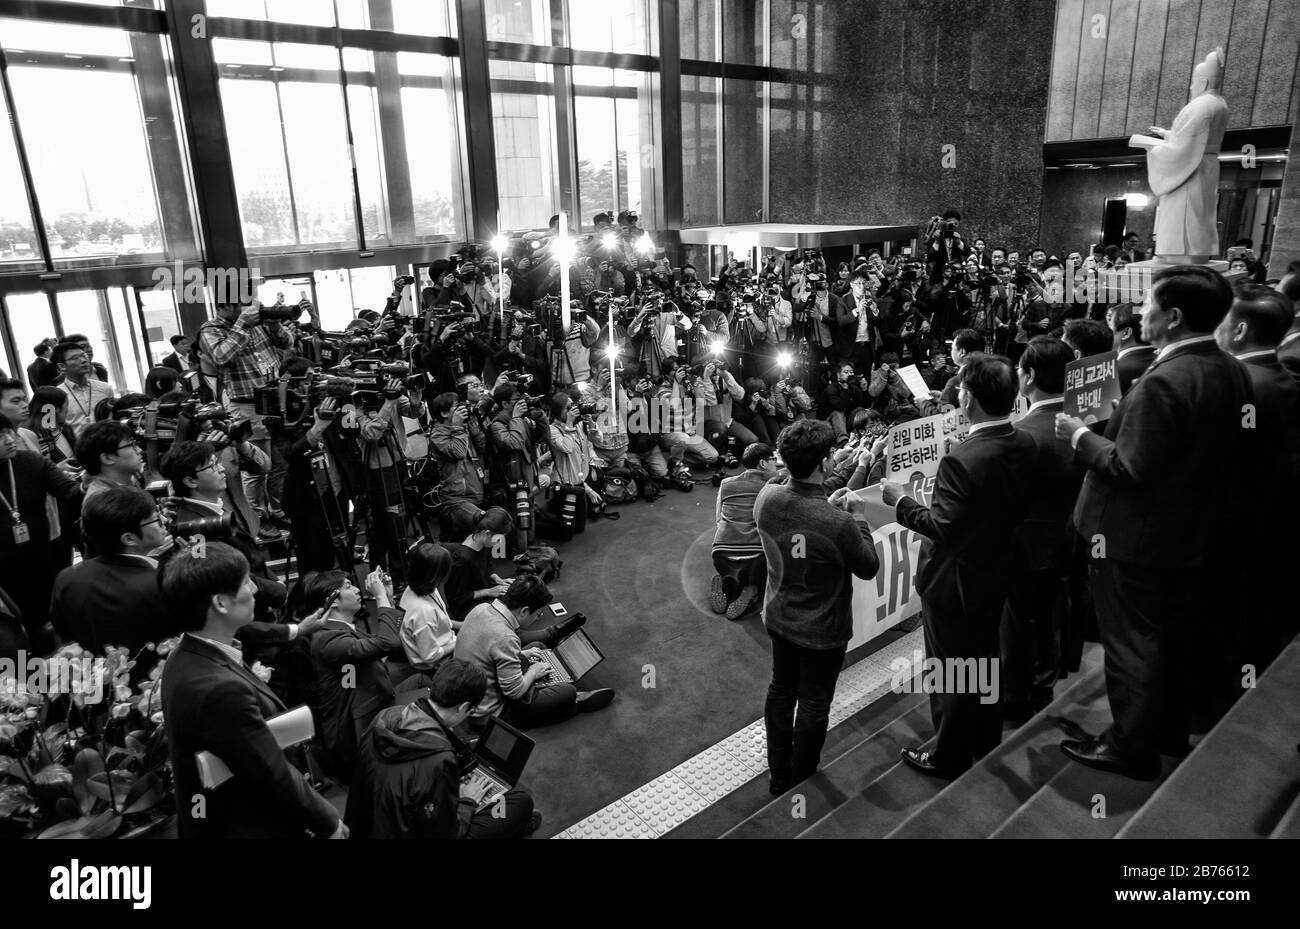 South Korea, Seoul, 12.10.2015. South Korean parliamentarians make a press statement in the building of the National Assembly (Gukhoe) in Seoul. [automated translation] Stock Photo